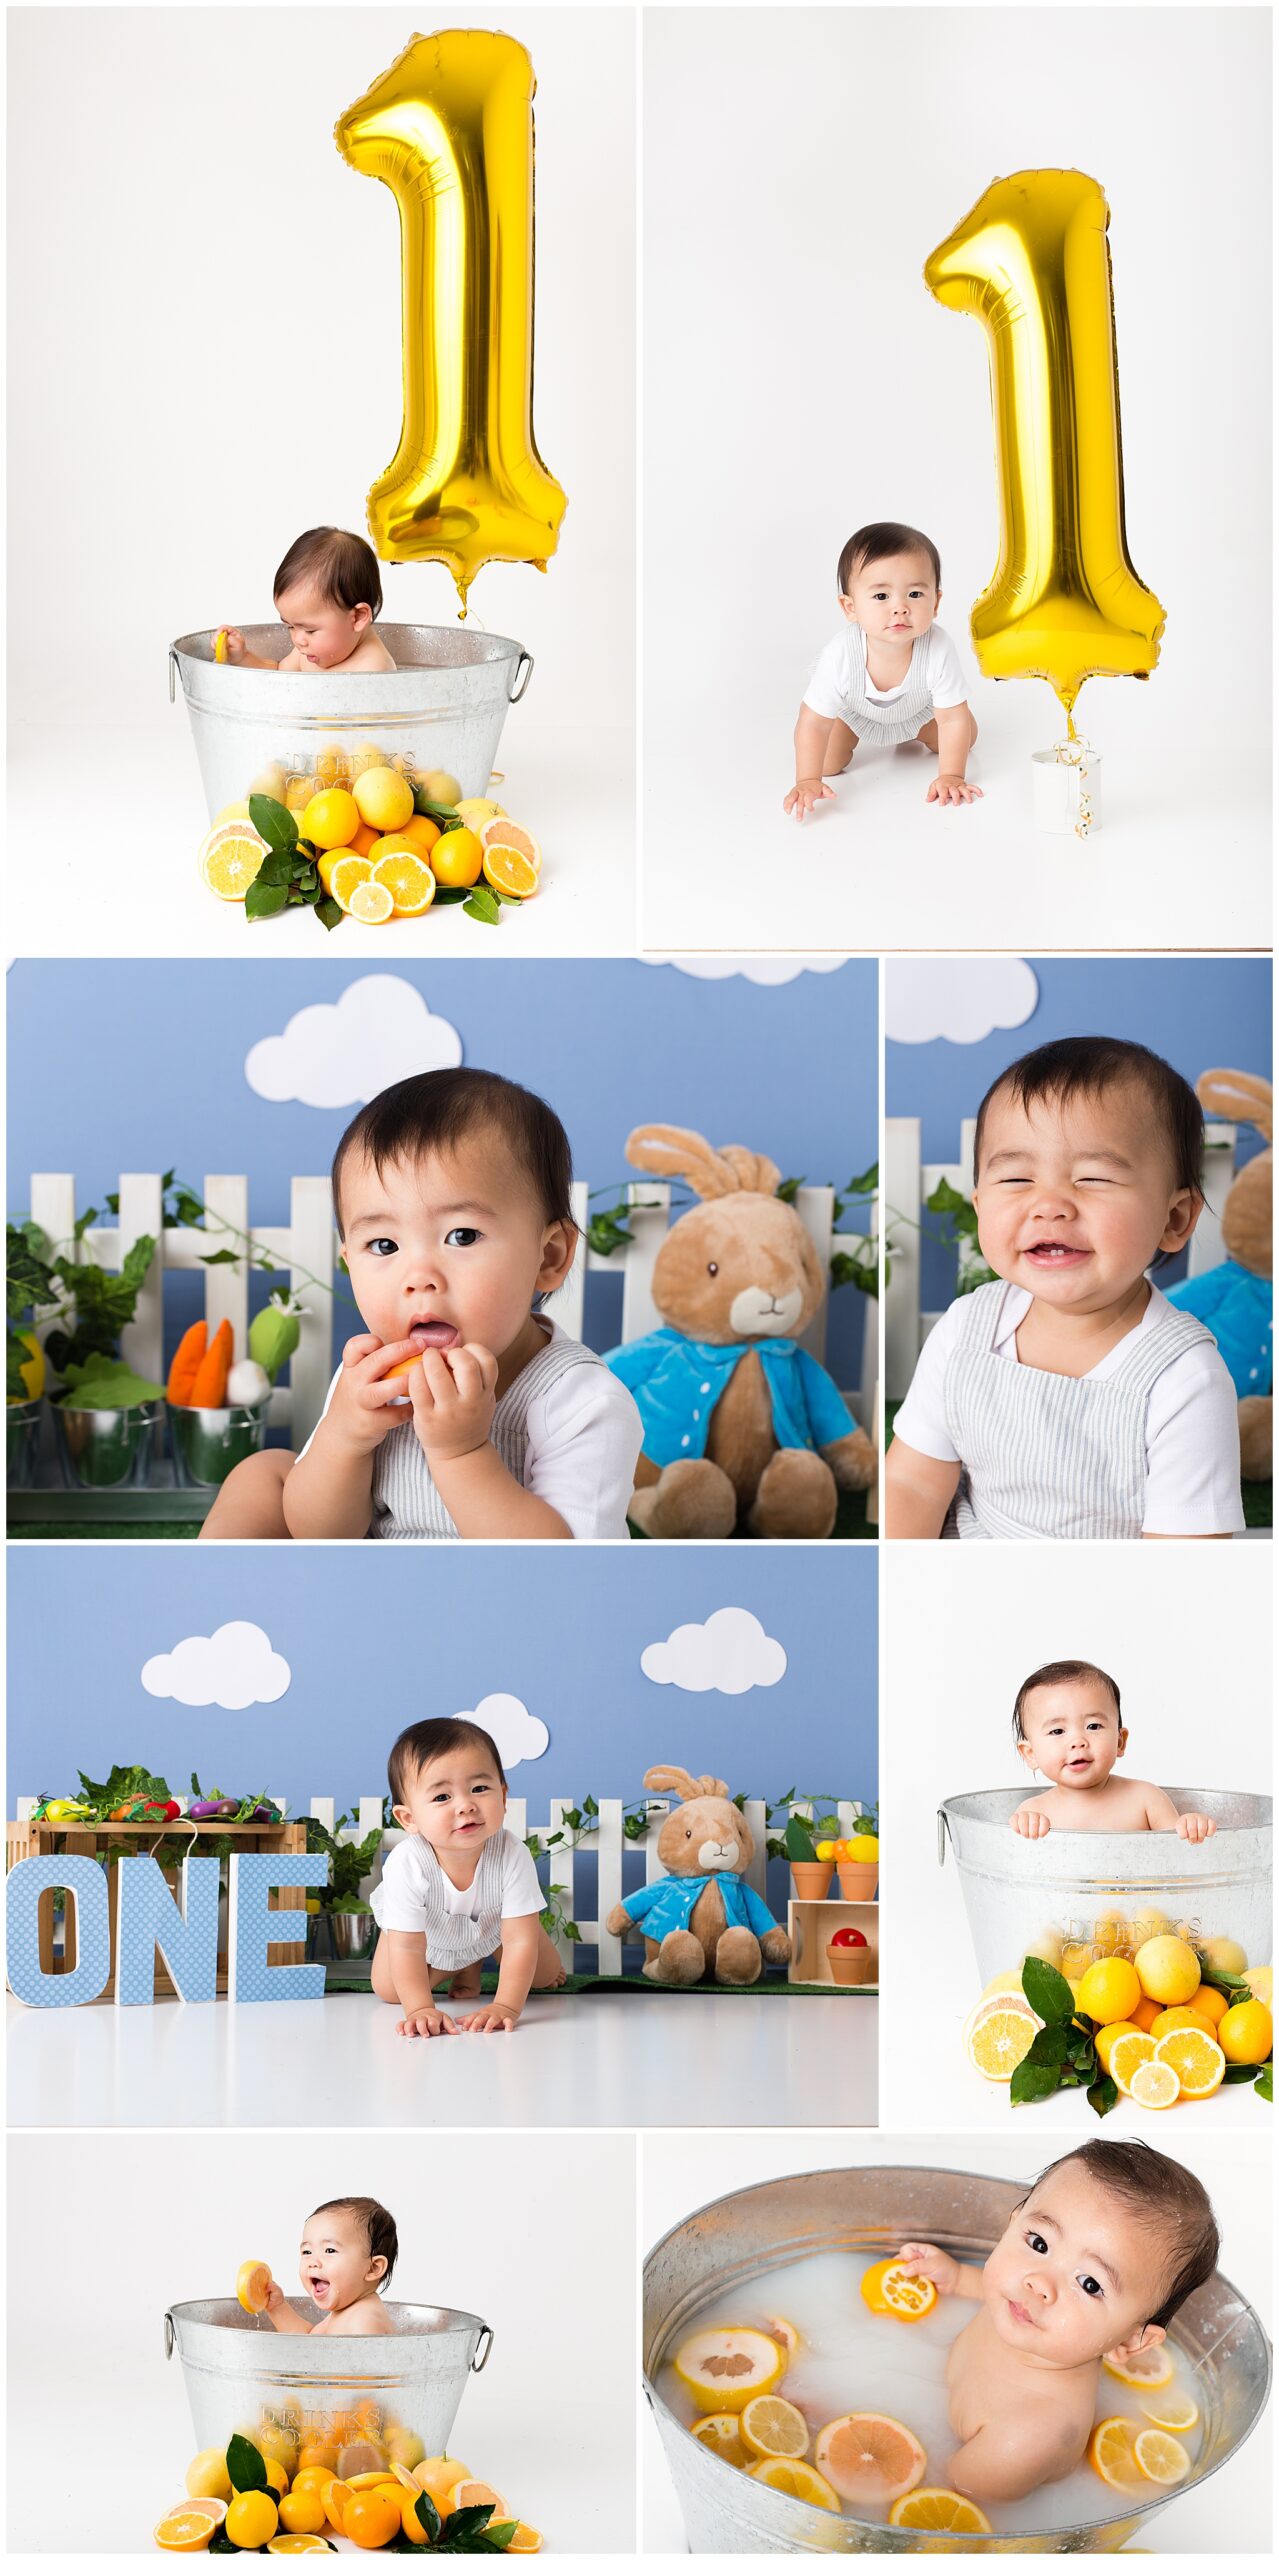 Fun, colourful photo sessions to celebrate baby first birthday with citrus fruit bath. Linda Hewell Photography